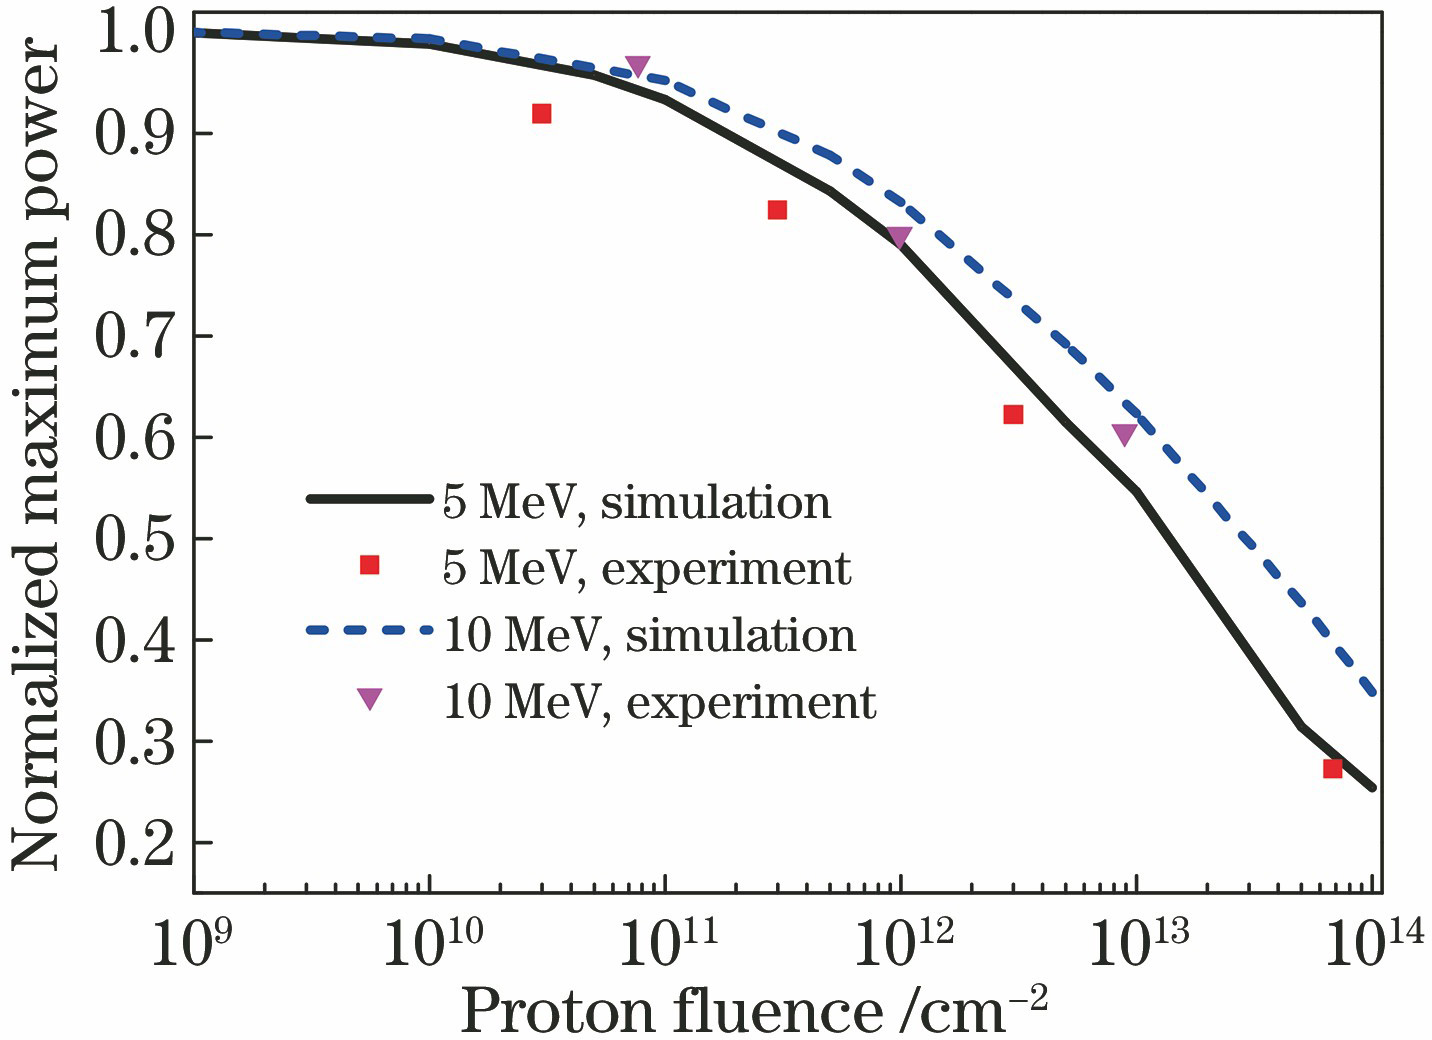 Degradation results of normalized maximum power of GaAs sub-cell irradiated by 5 MeV and 10 MeV protons versus proton fluence